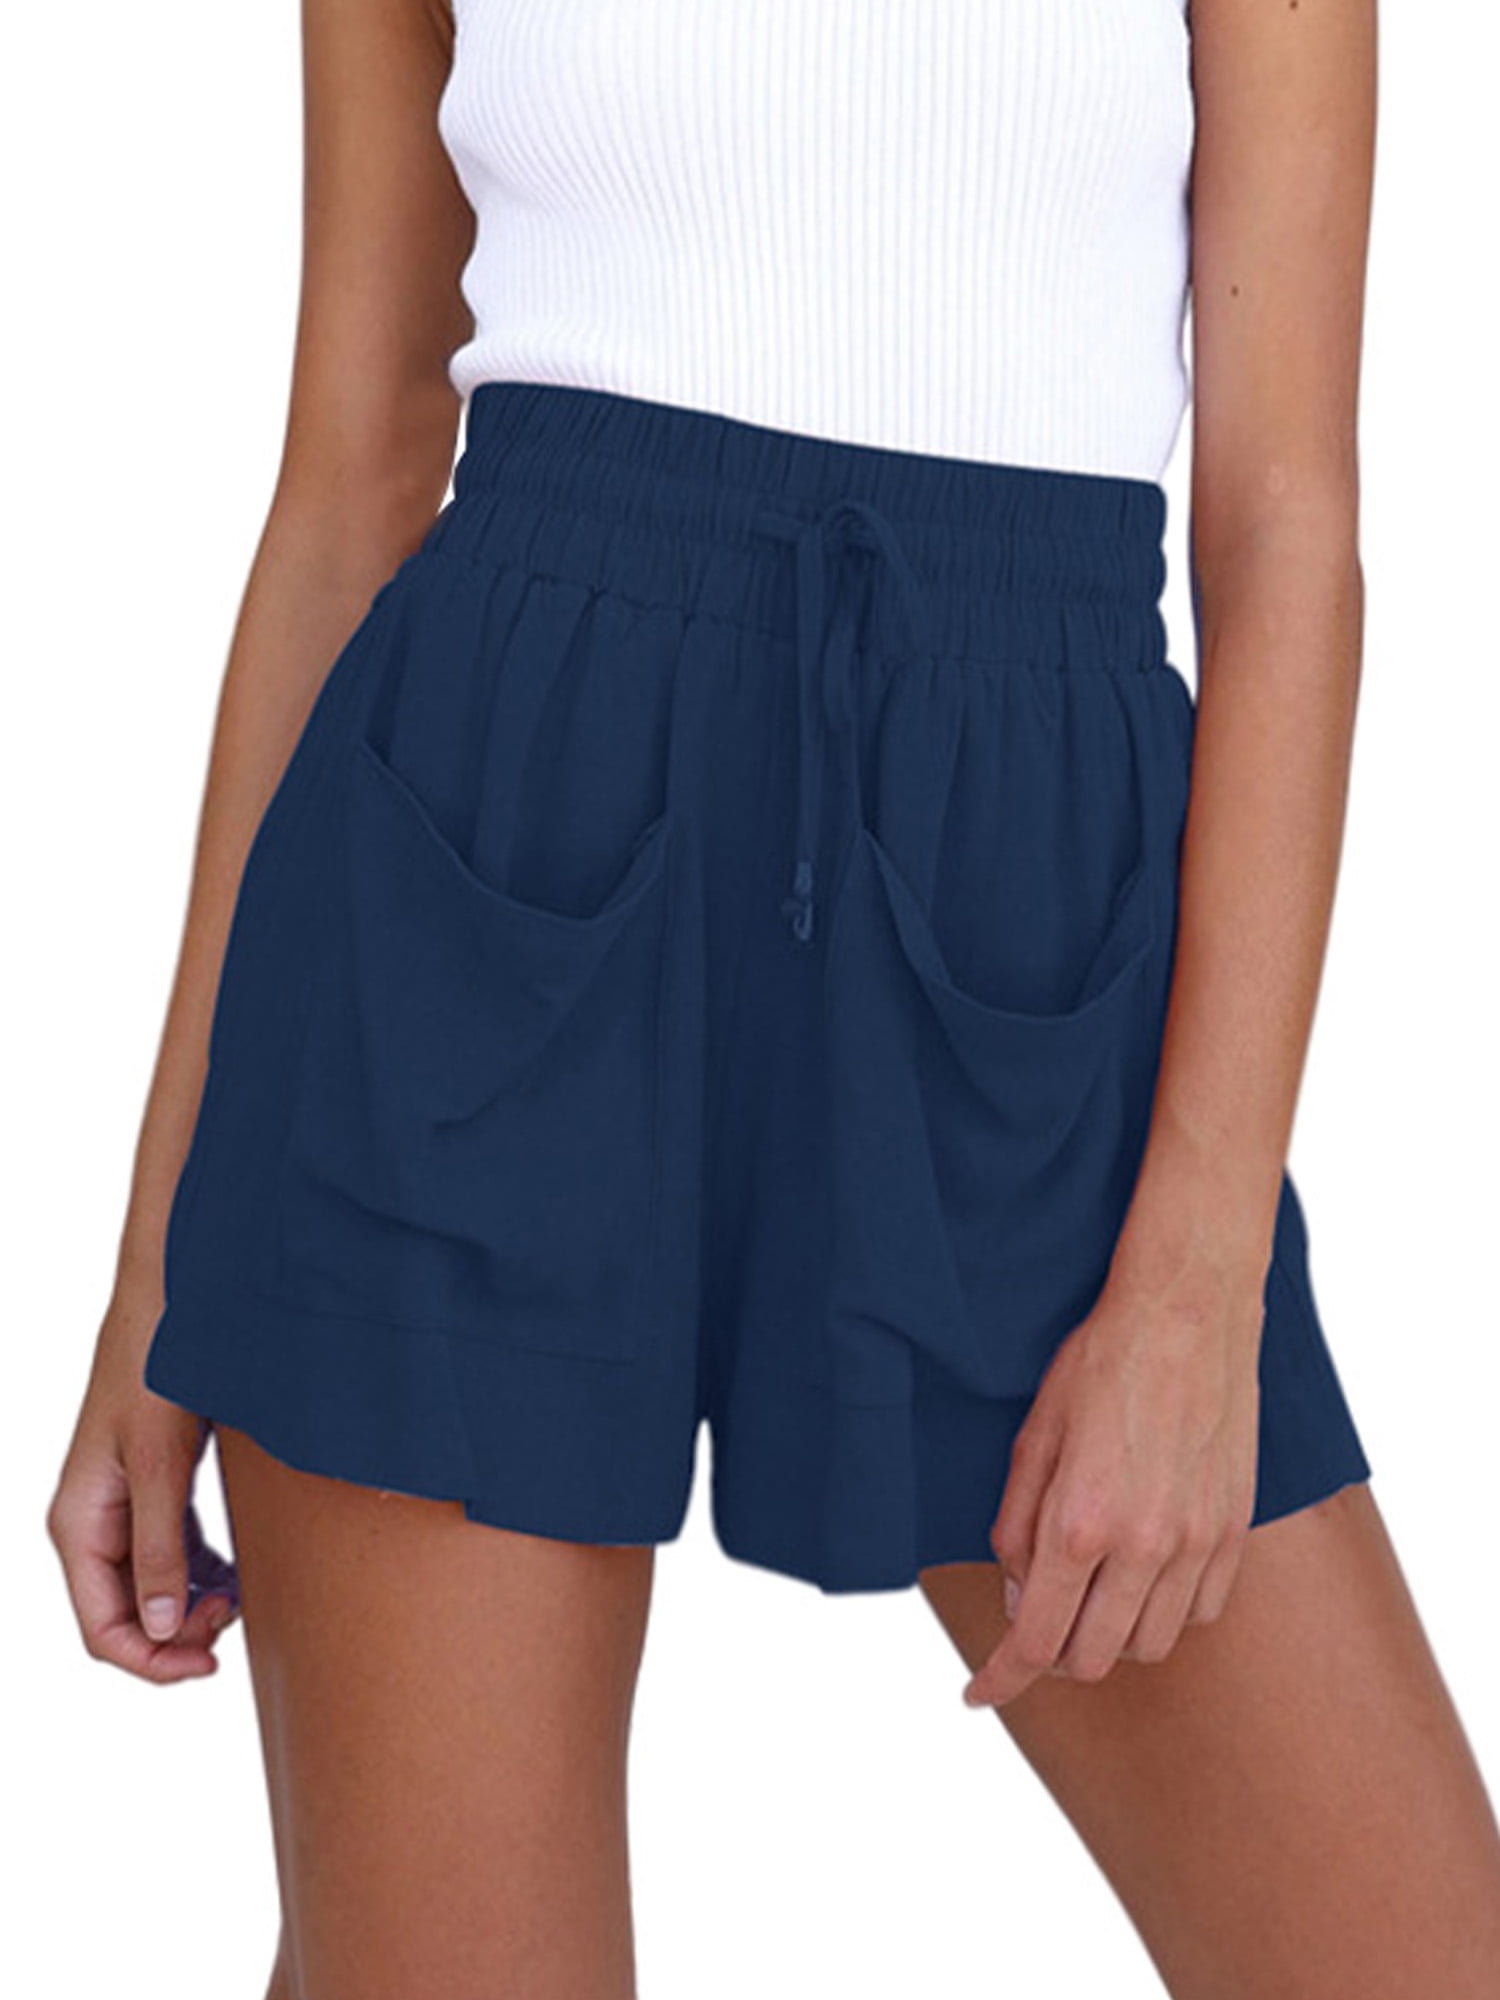 Women's Casual Summer Comfy Shorts With Elastic Waist Band Short pants S-3XL 